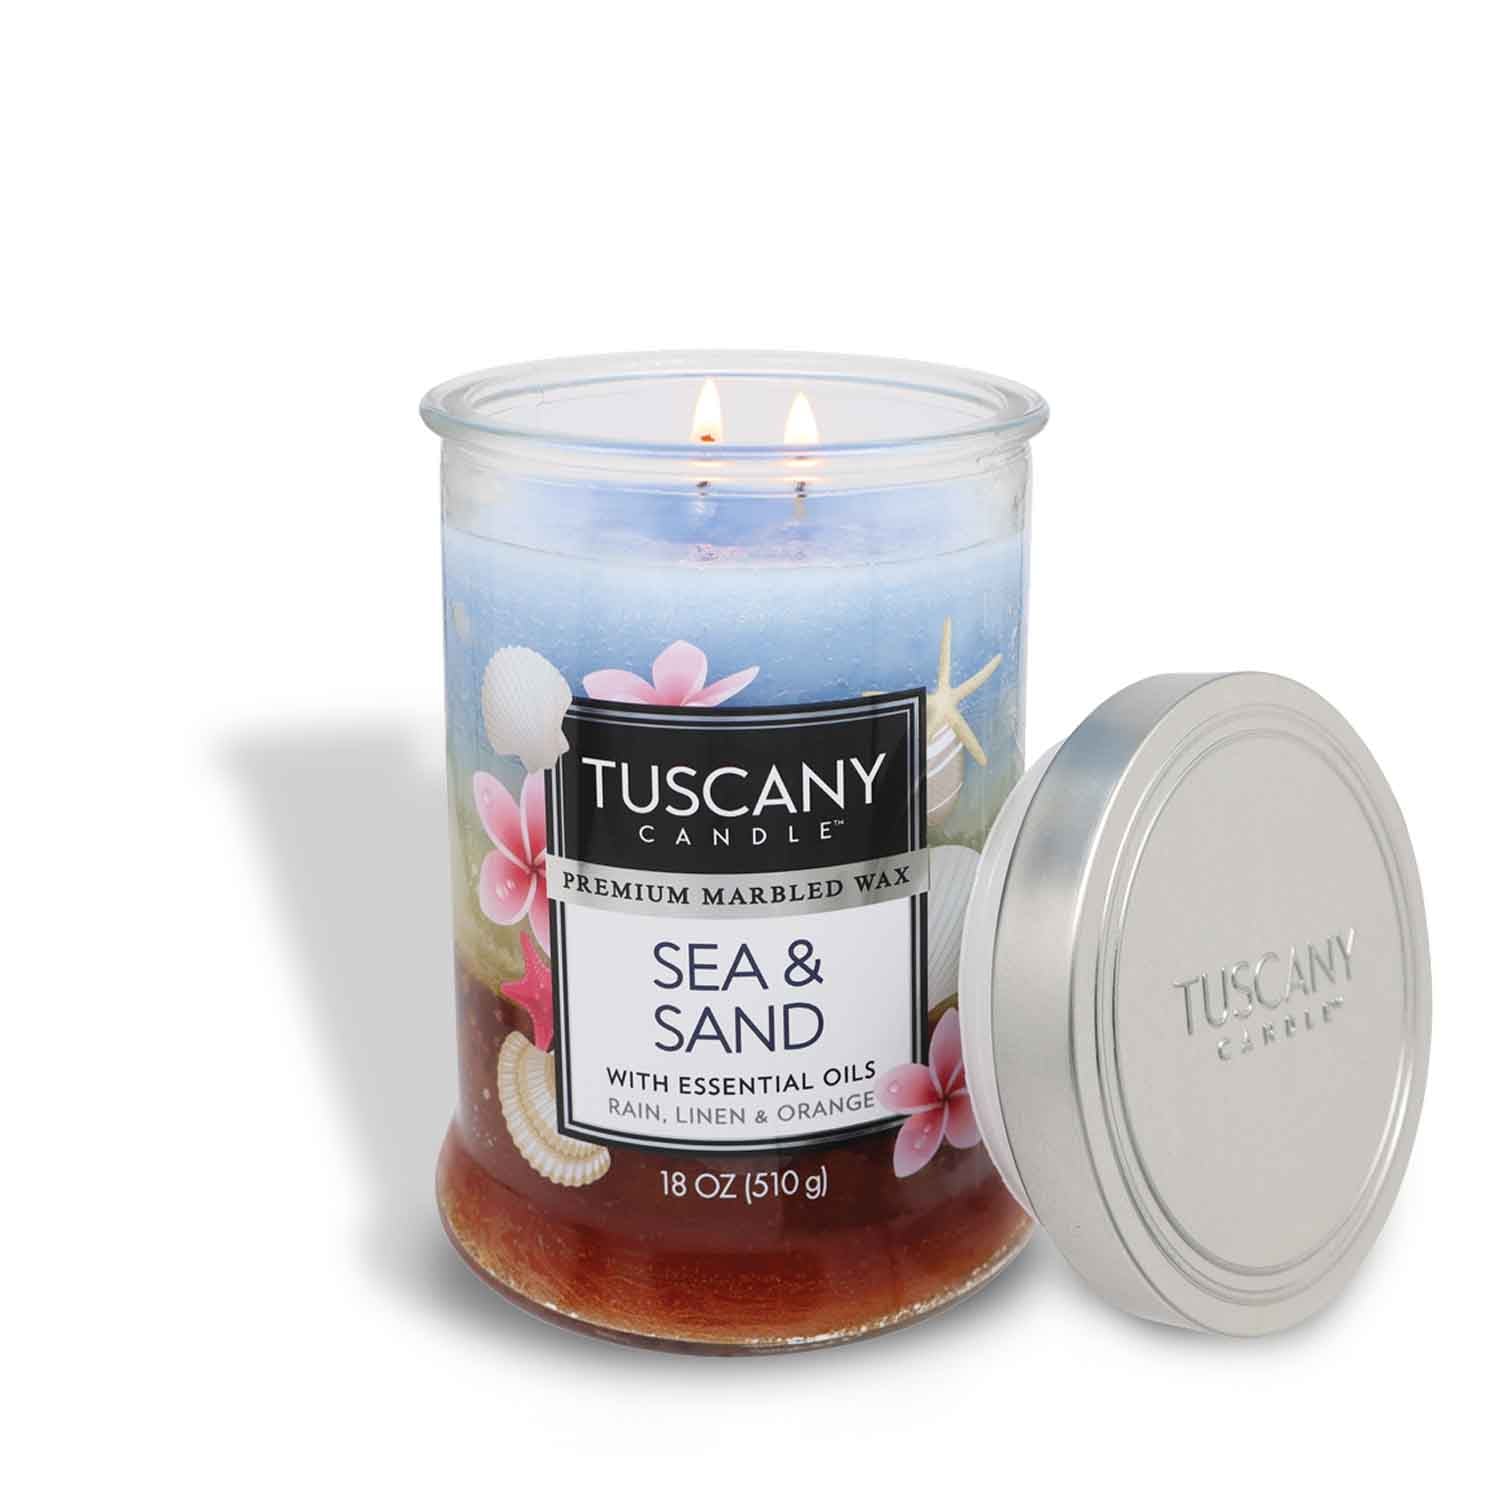 Sea Salt & Sand Dunes Candle / Available in Multiple Sizes – NA NIN